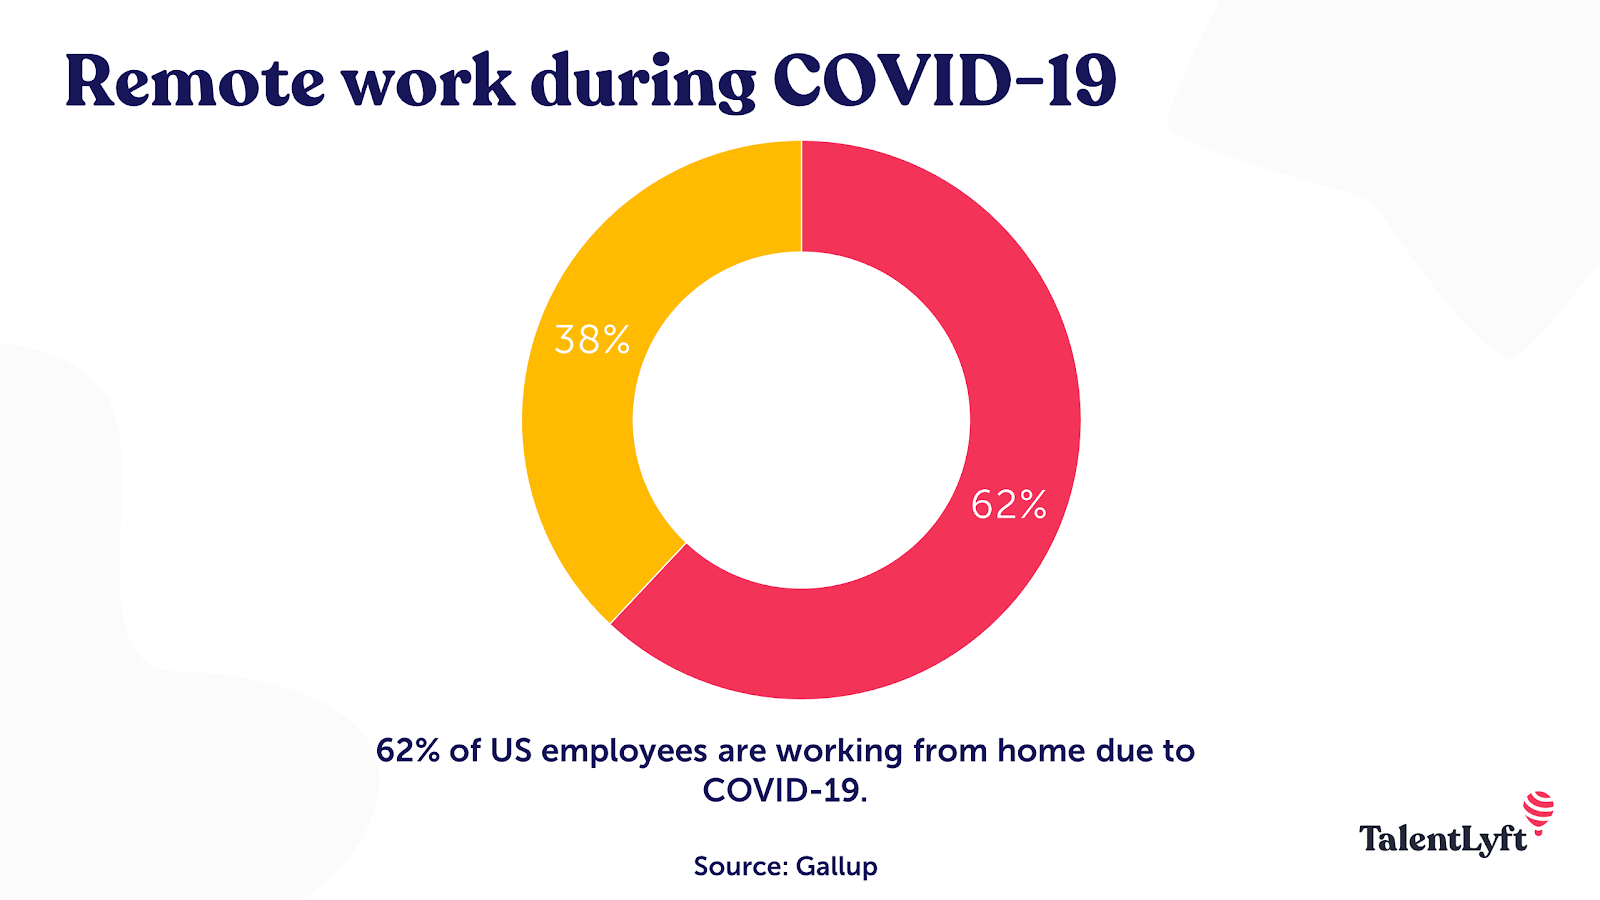 Remote work during COVID-19: How many people work remotely now?